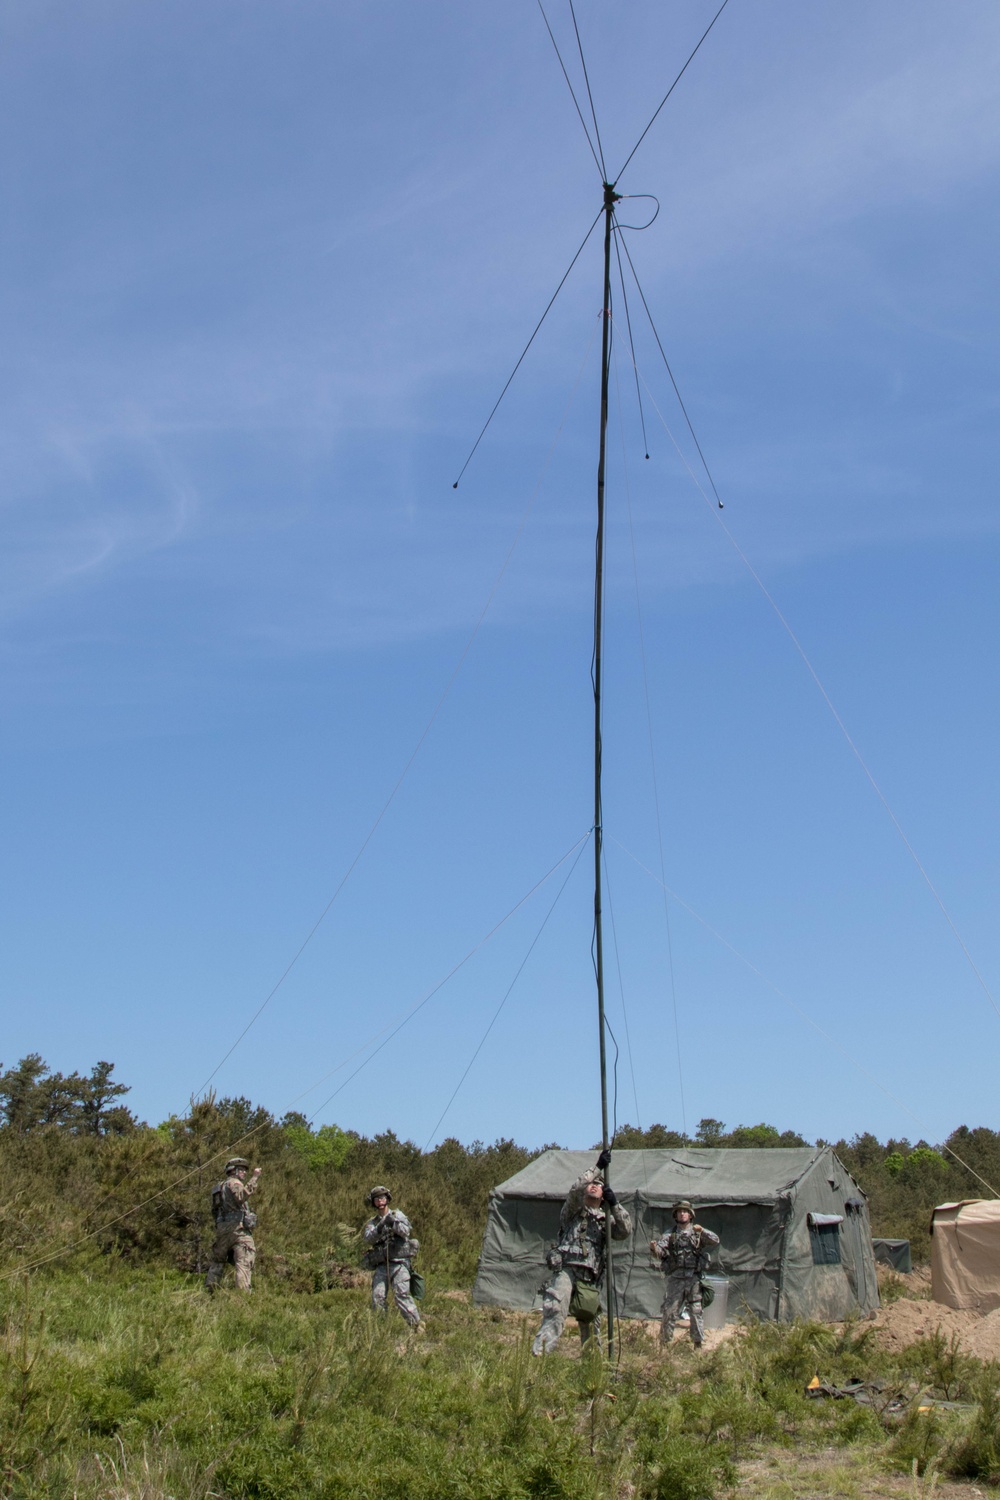 Soldiers raise antenna at dig site as part of training exercise